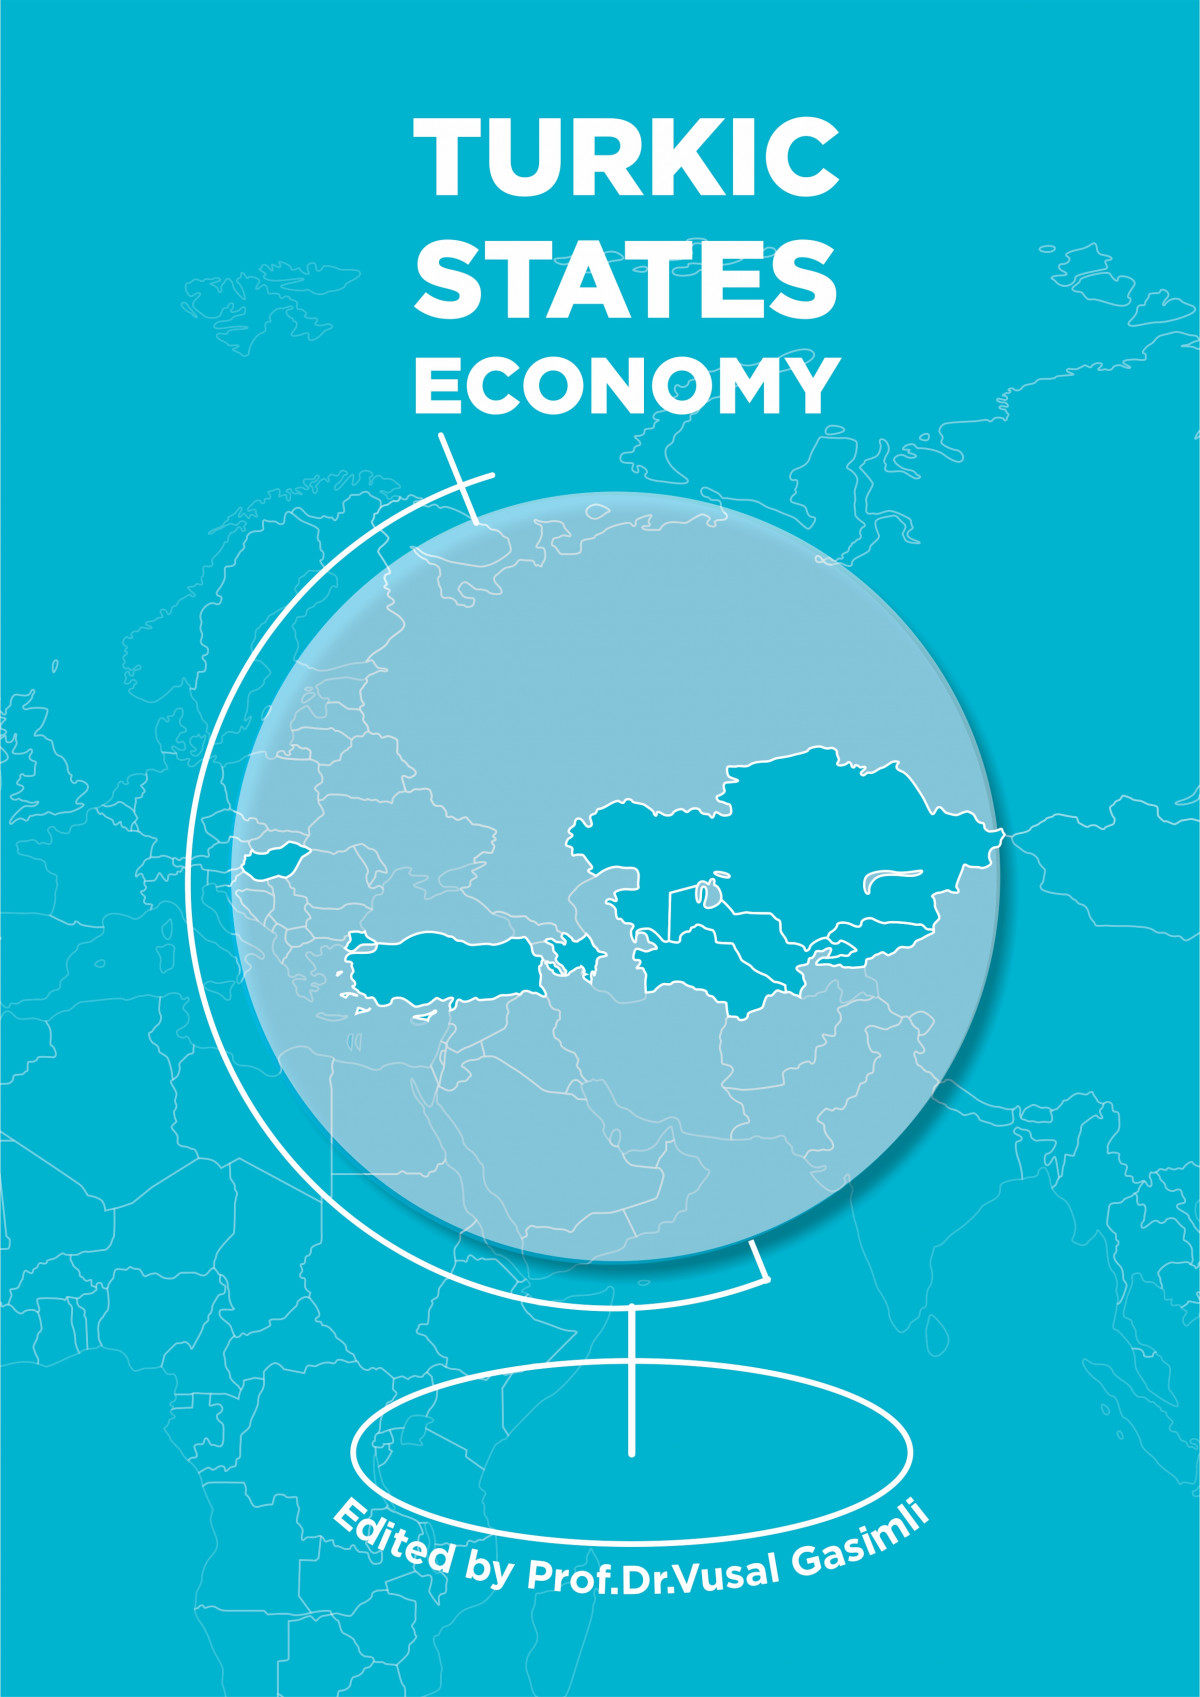 The book "Turkic States Economy" was presented at the meeting of OTS in Istanbul